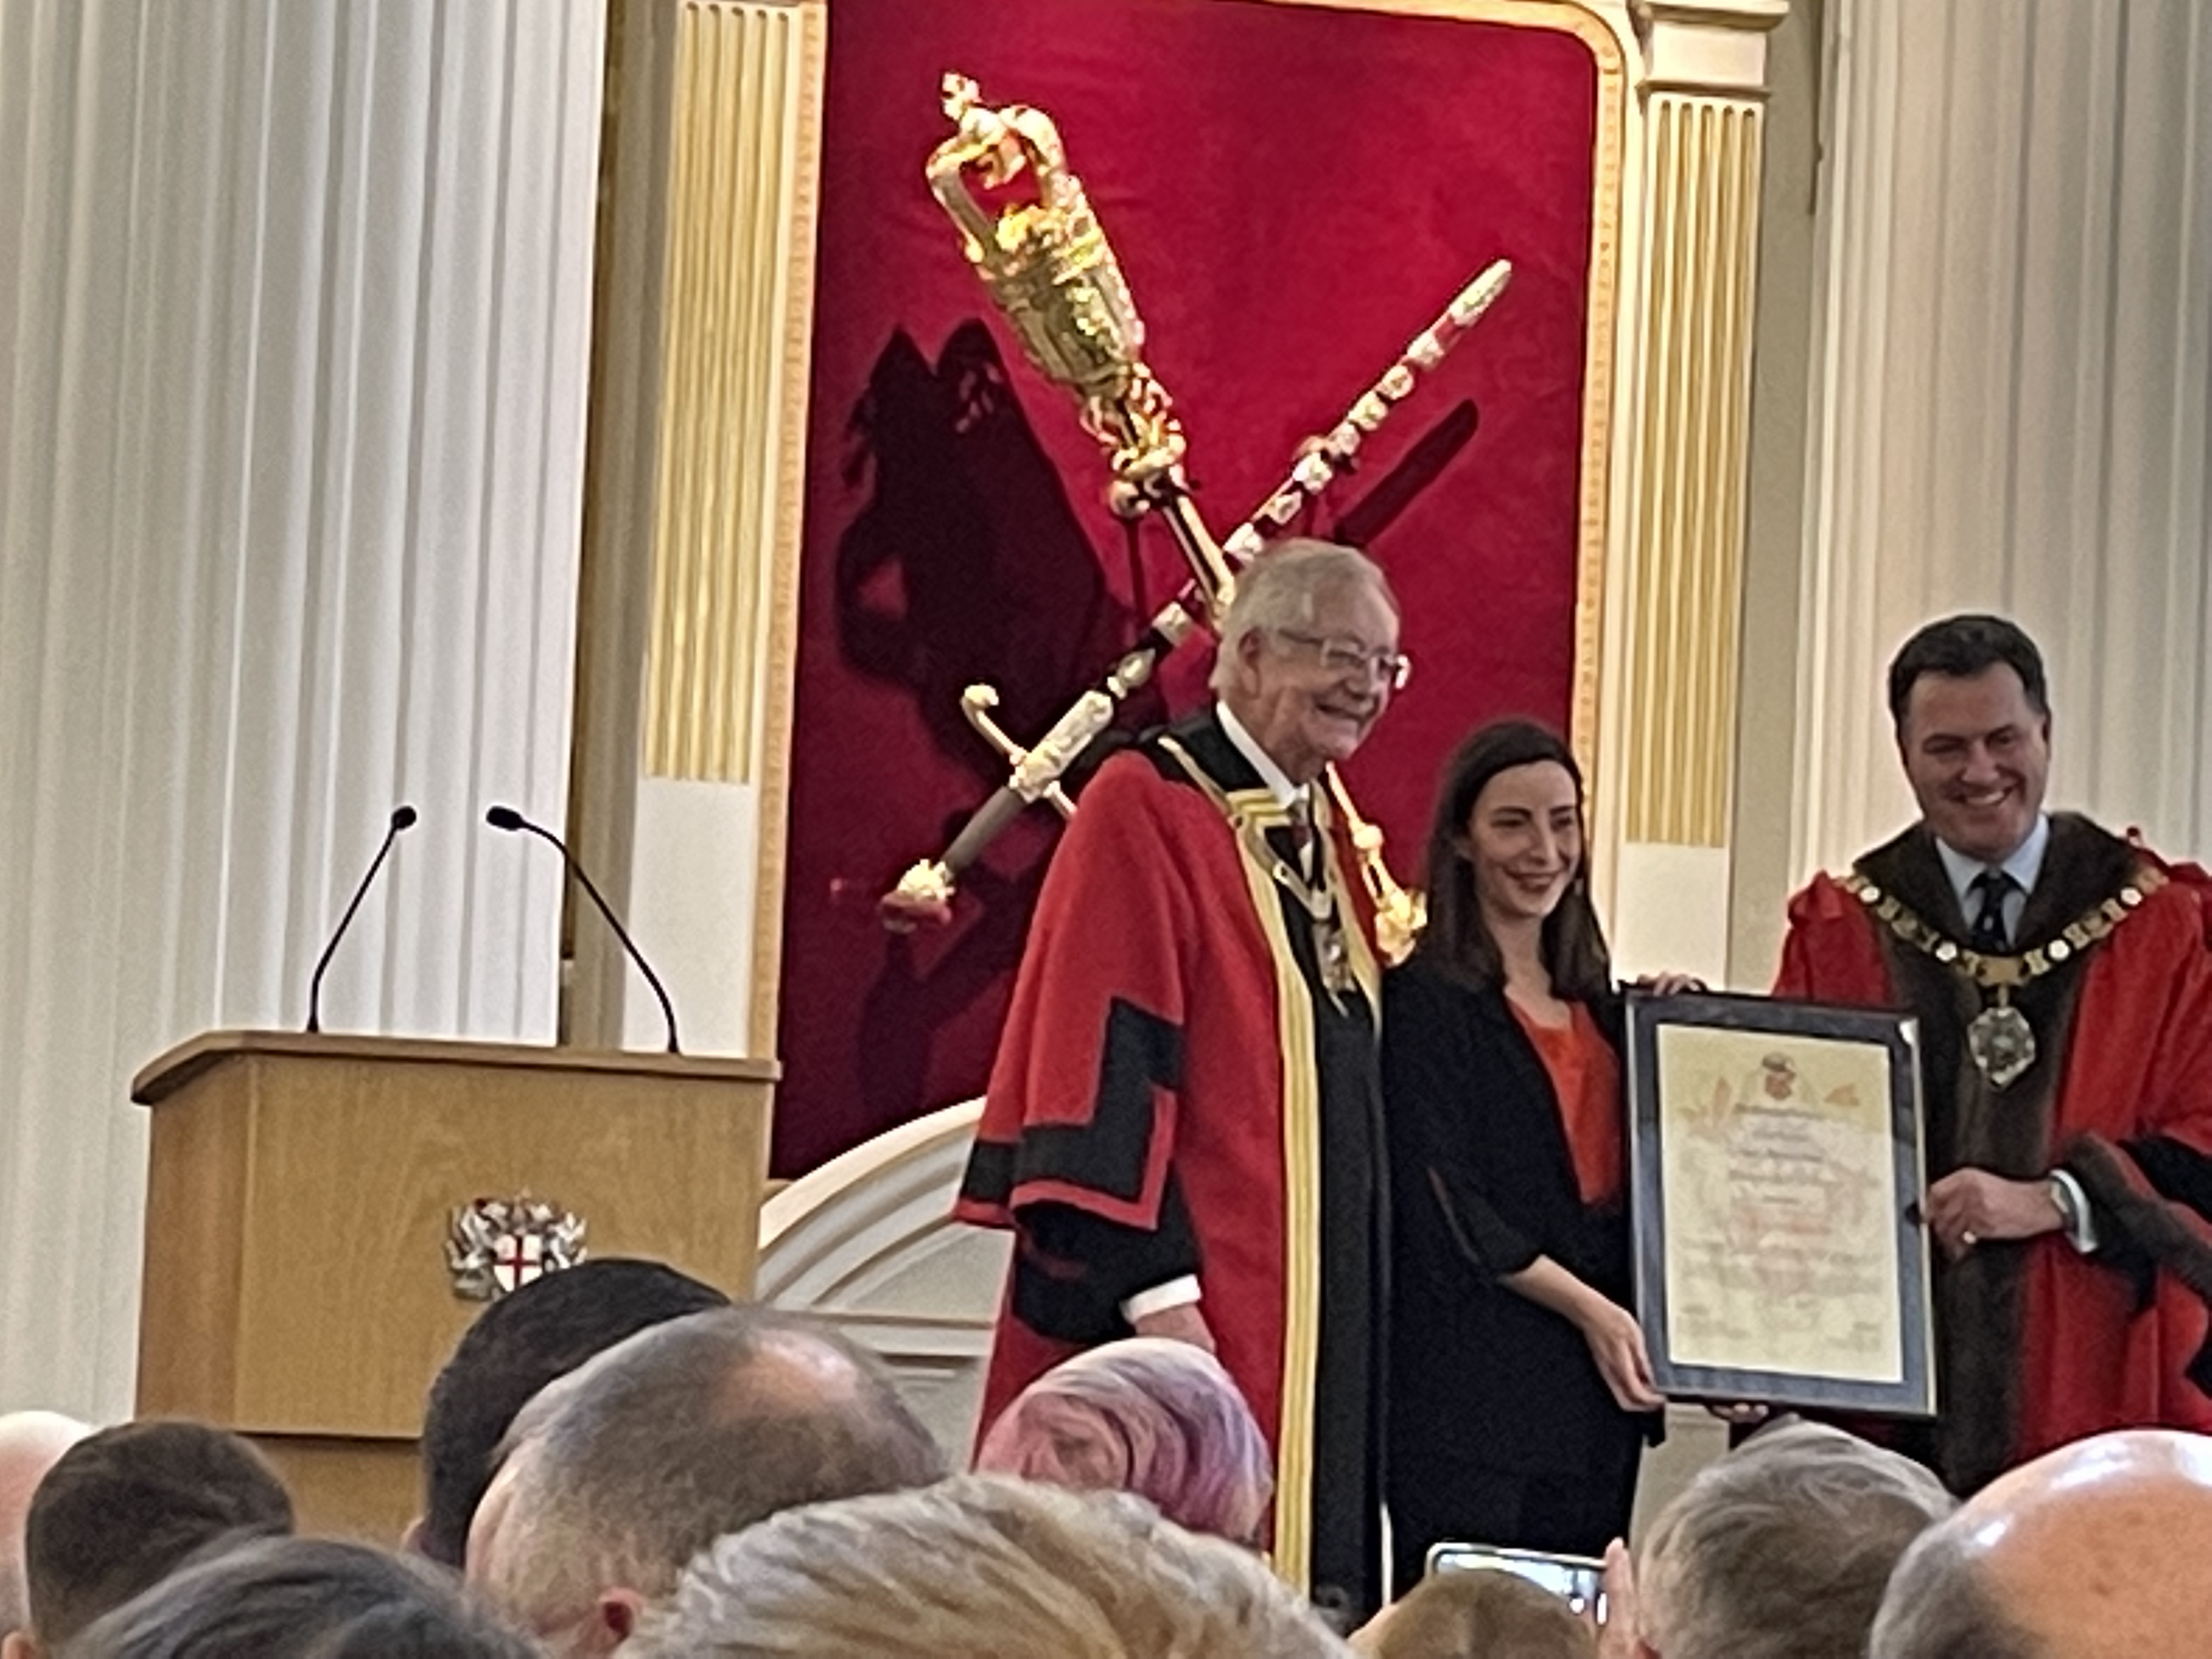 Anna Koukoullis Is Presented With The Master’s Journeyman Certificate By The Lord Mayor In Mansion House On 14 March 2022